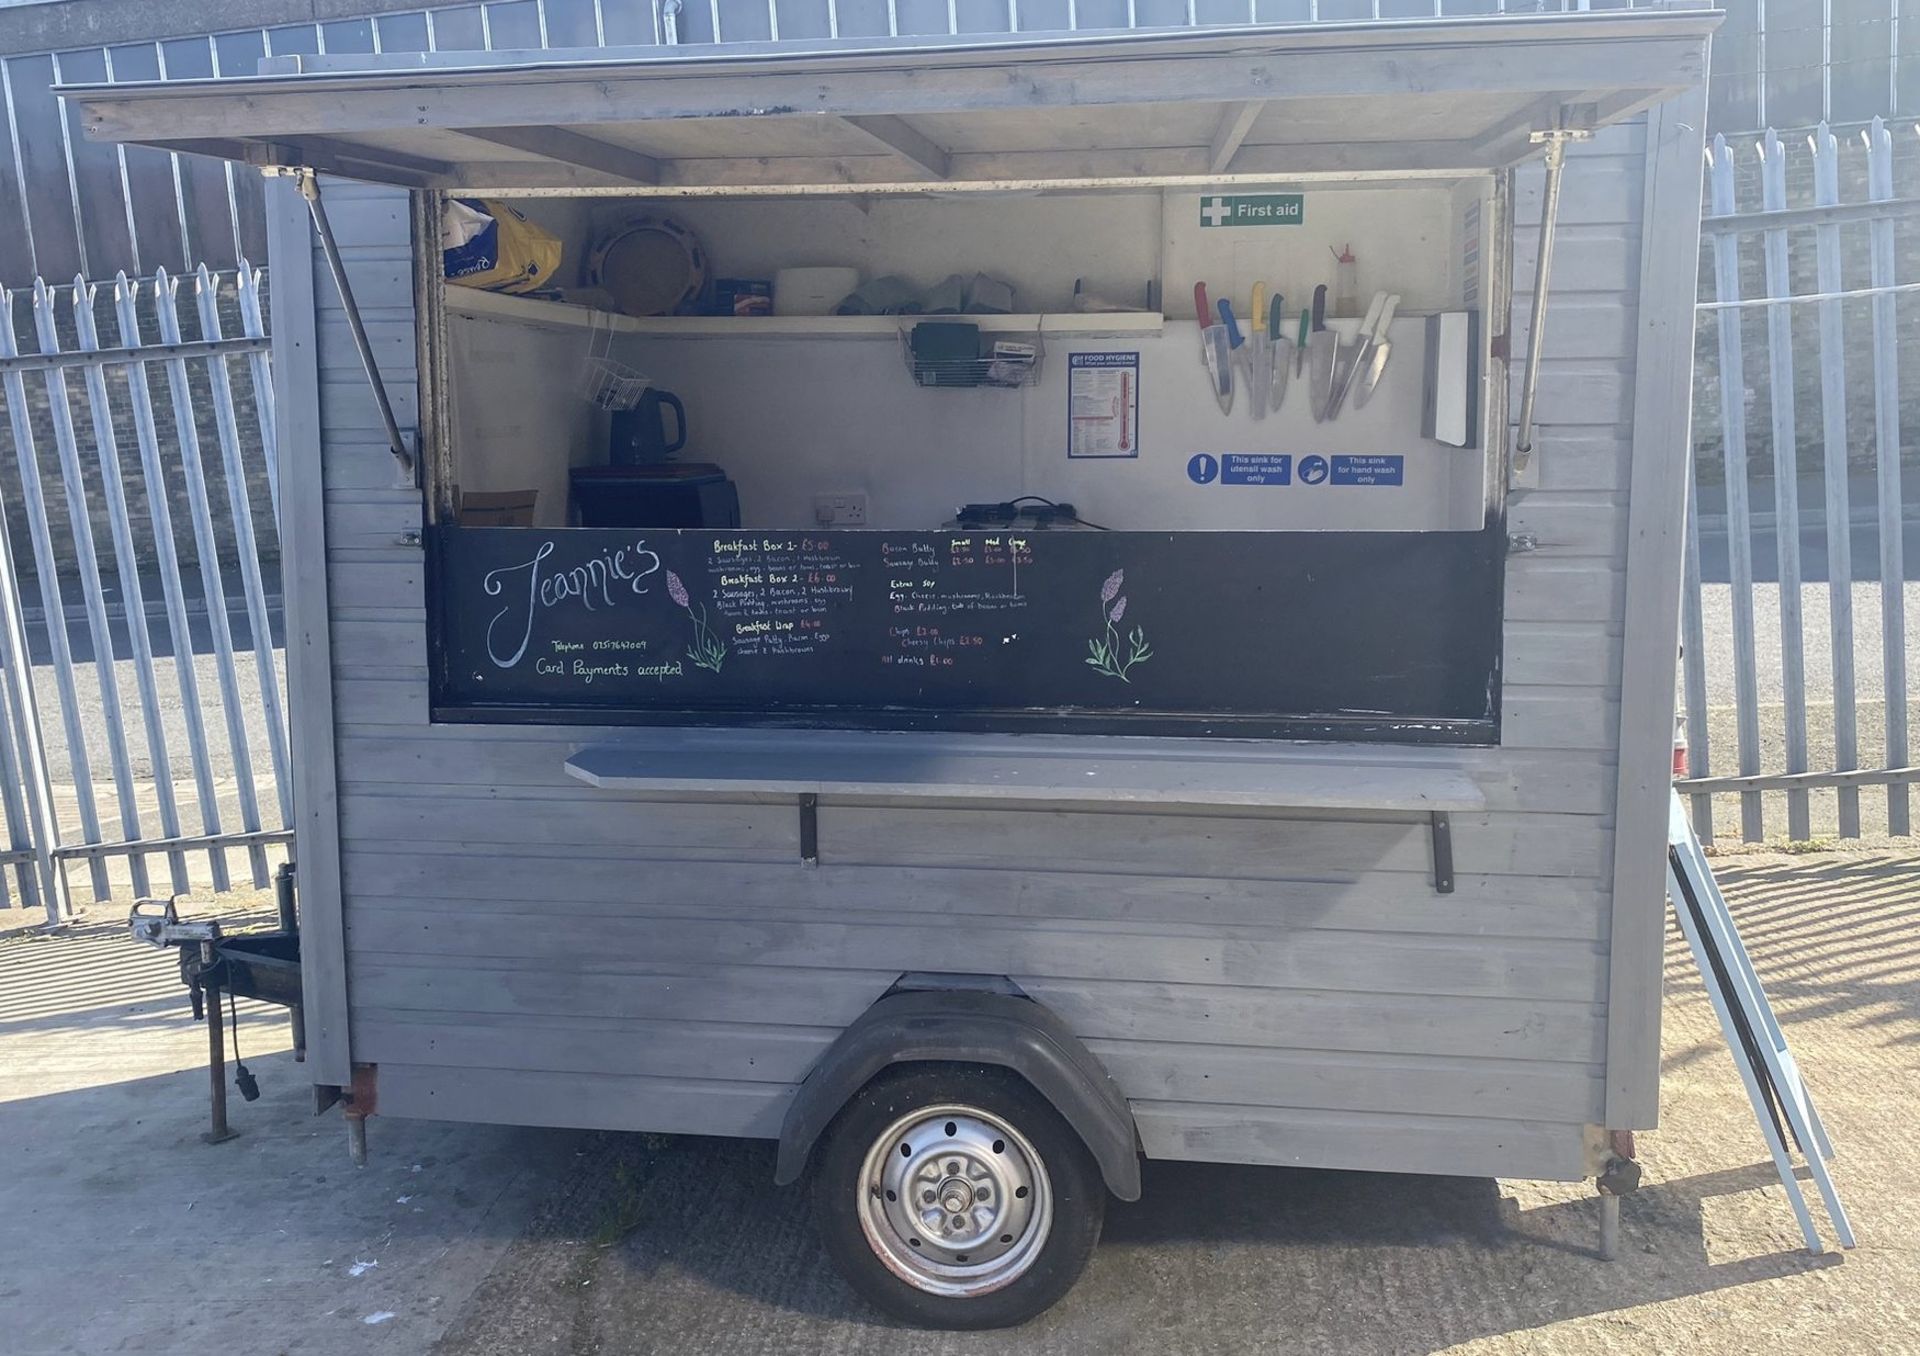 Single axle Catering Trailer comprising fitted units, sink, fridge, freezer, griddle, worktops (